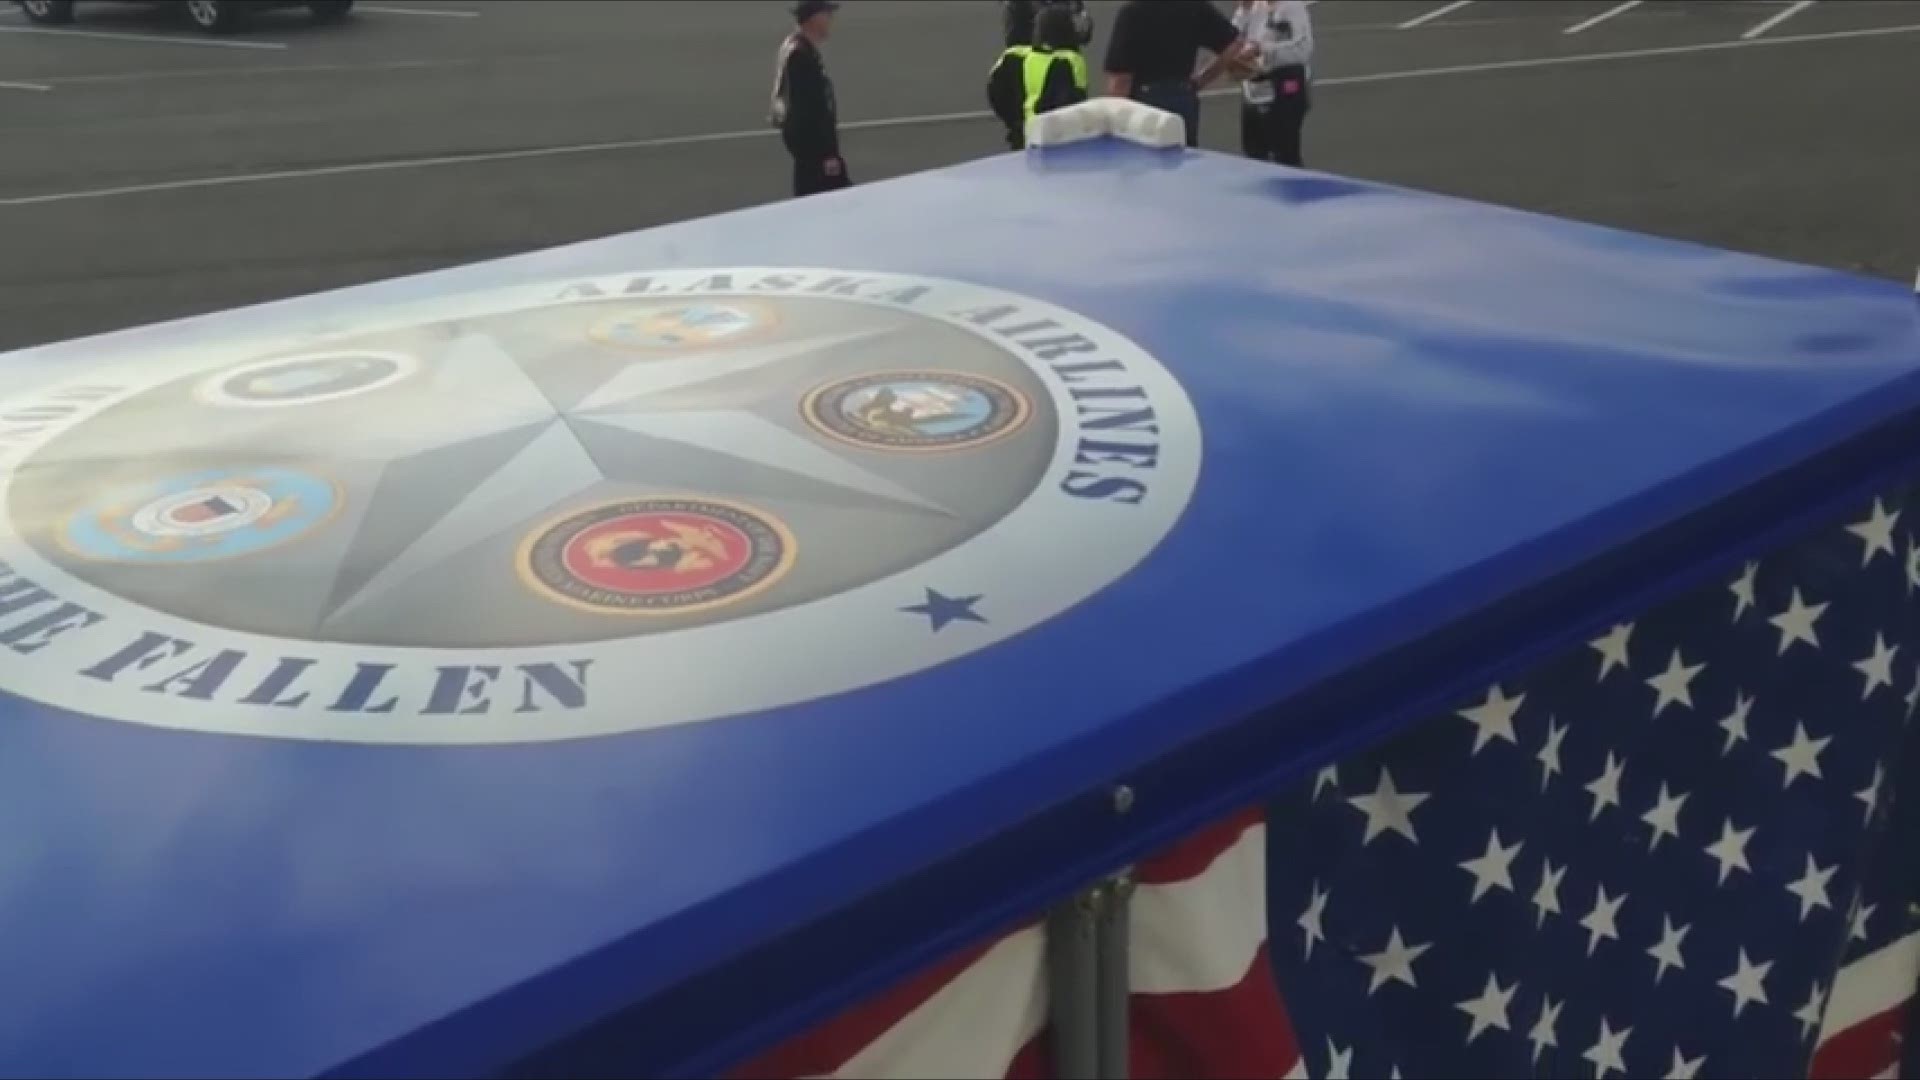 Alaska Airlines has created a special cart that is decorated and designed to transfer the casket of fallen soldiers as they arrive at airports.